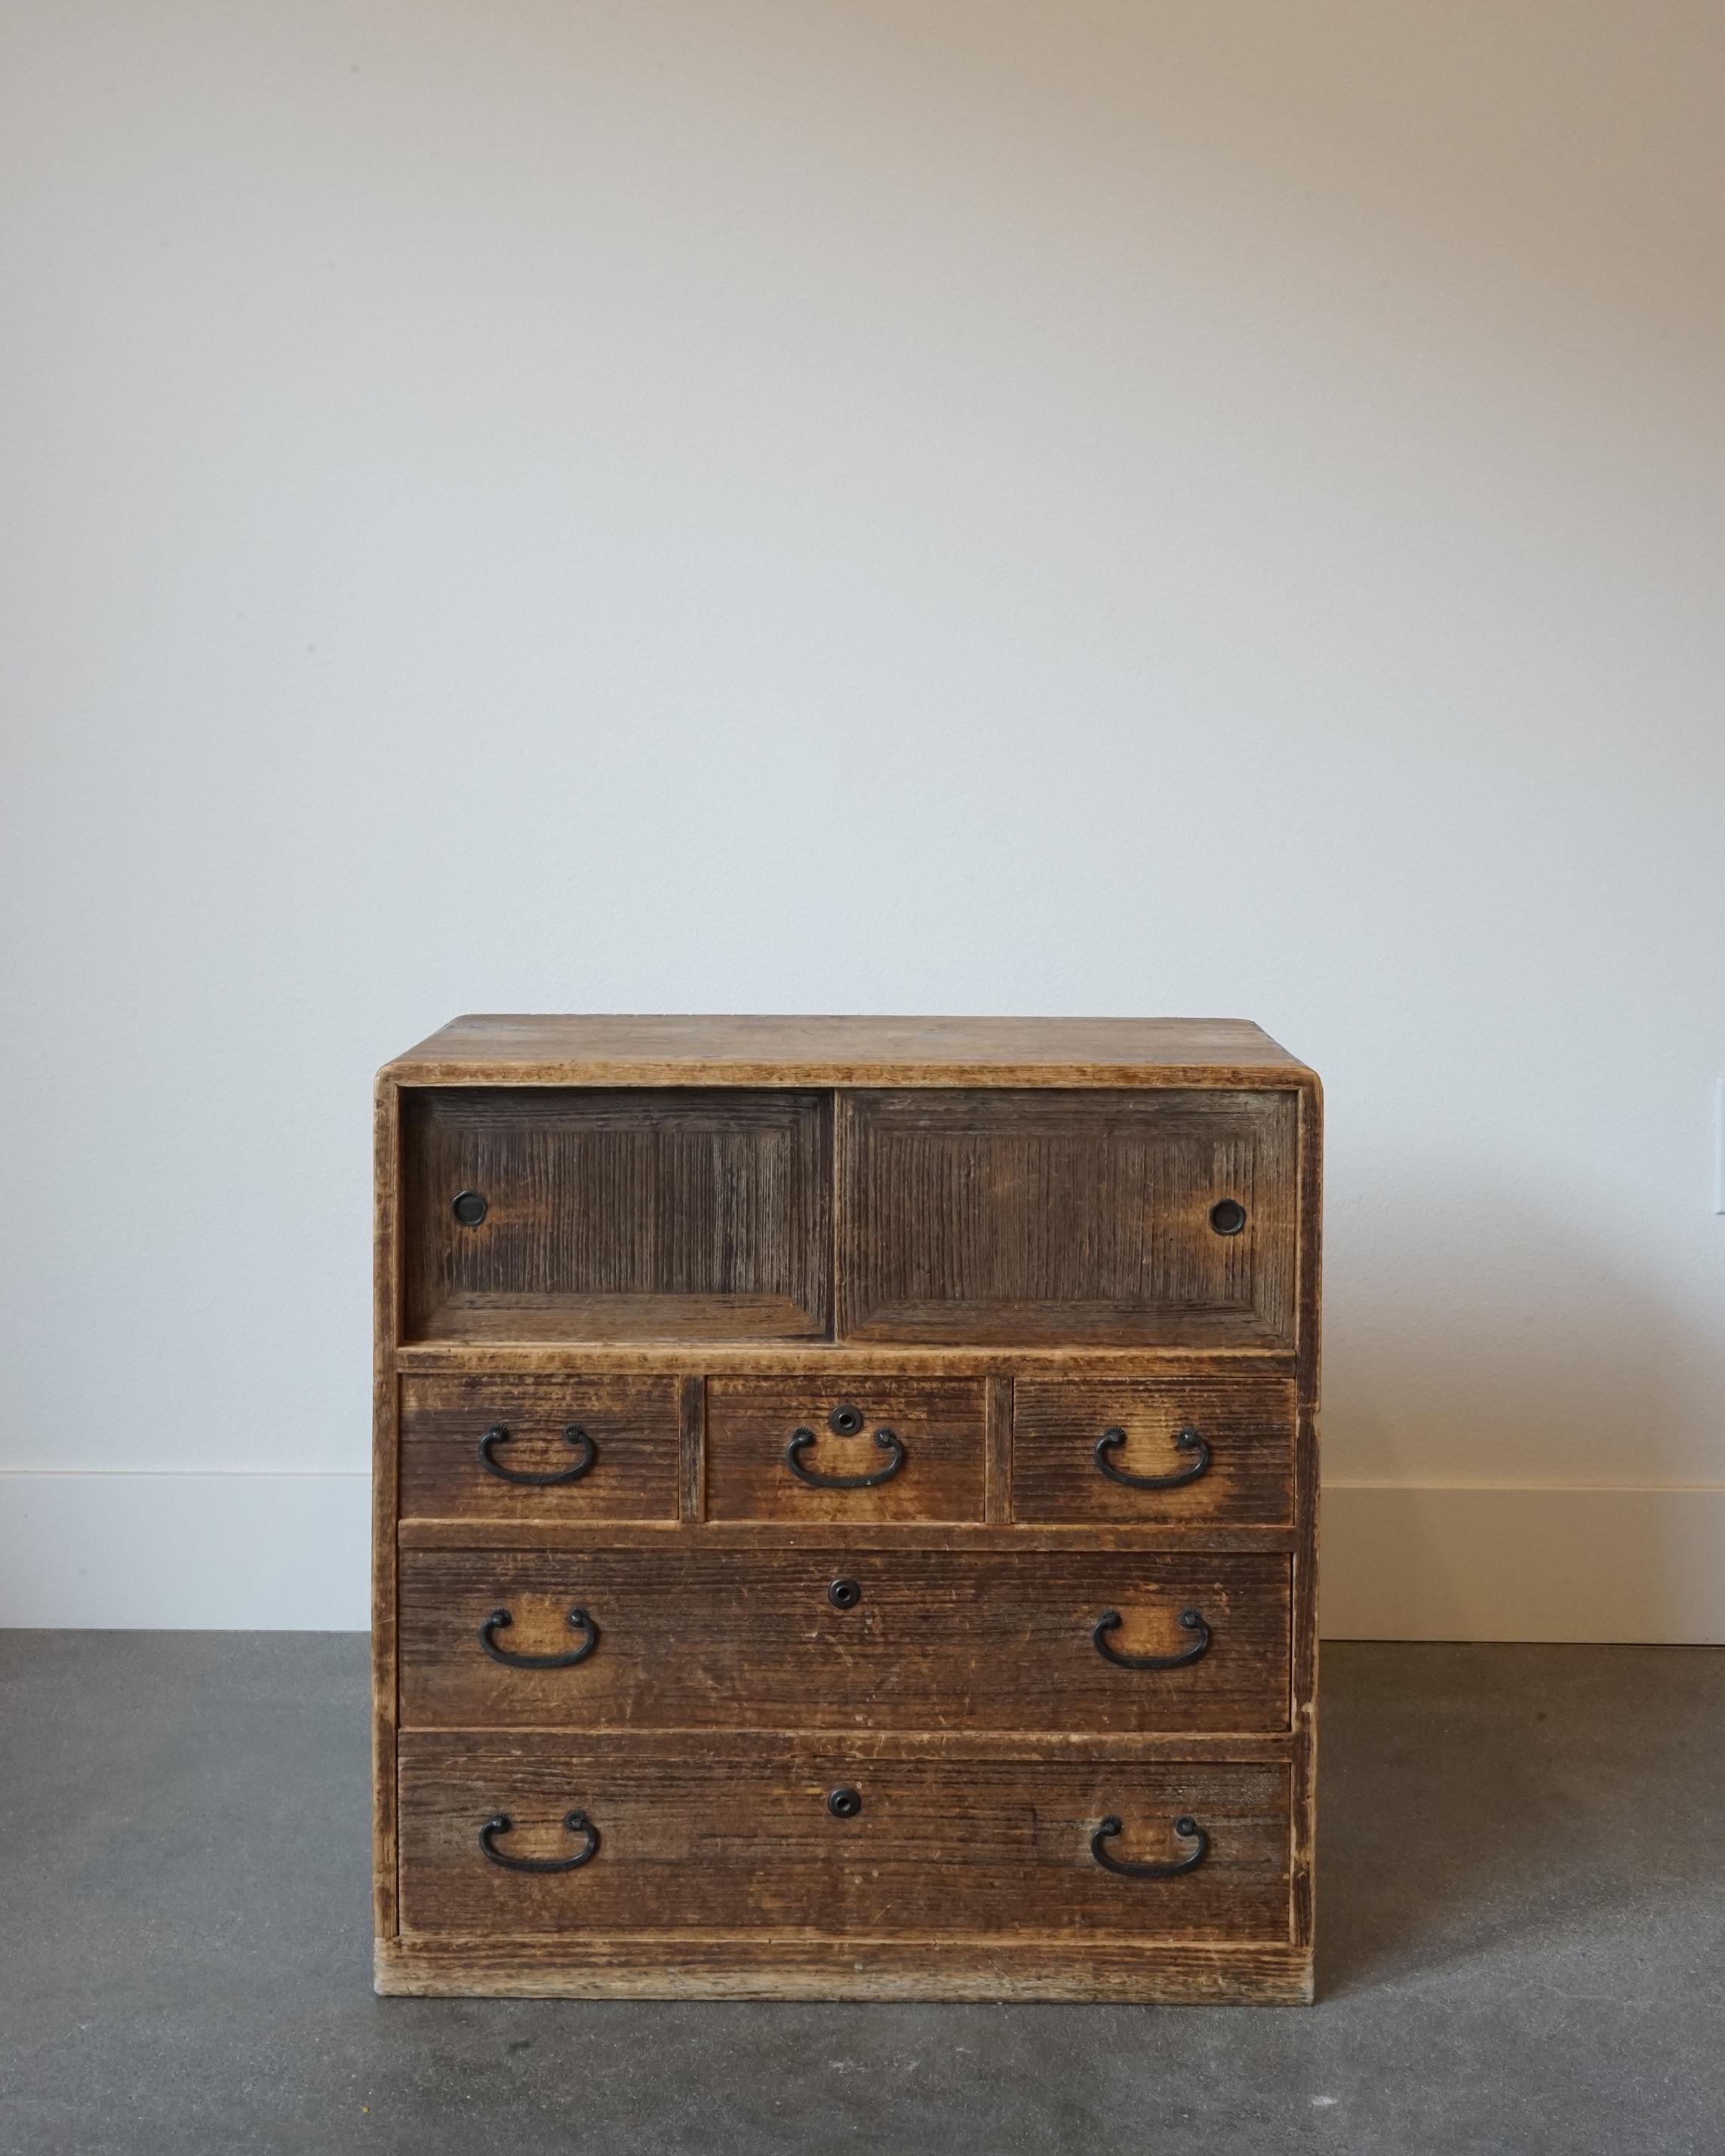 Beautiful patinated wooden small tansu from Japan. Tansu chests are very popular throughout Japan and were originally created as a portable set of drawers. Crafted using Japanese joinery with the exemption of nails or screws, they are ideal for